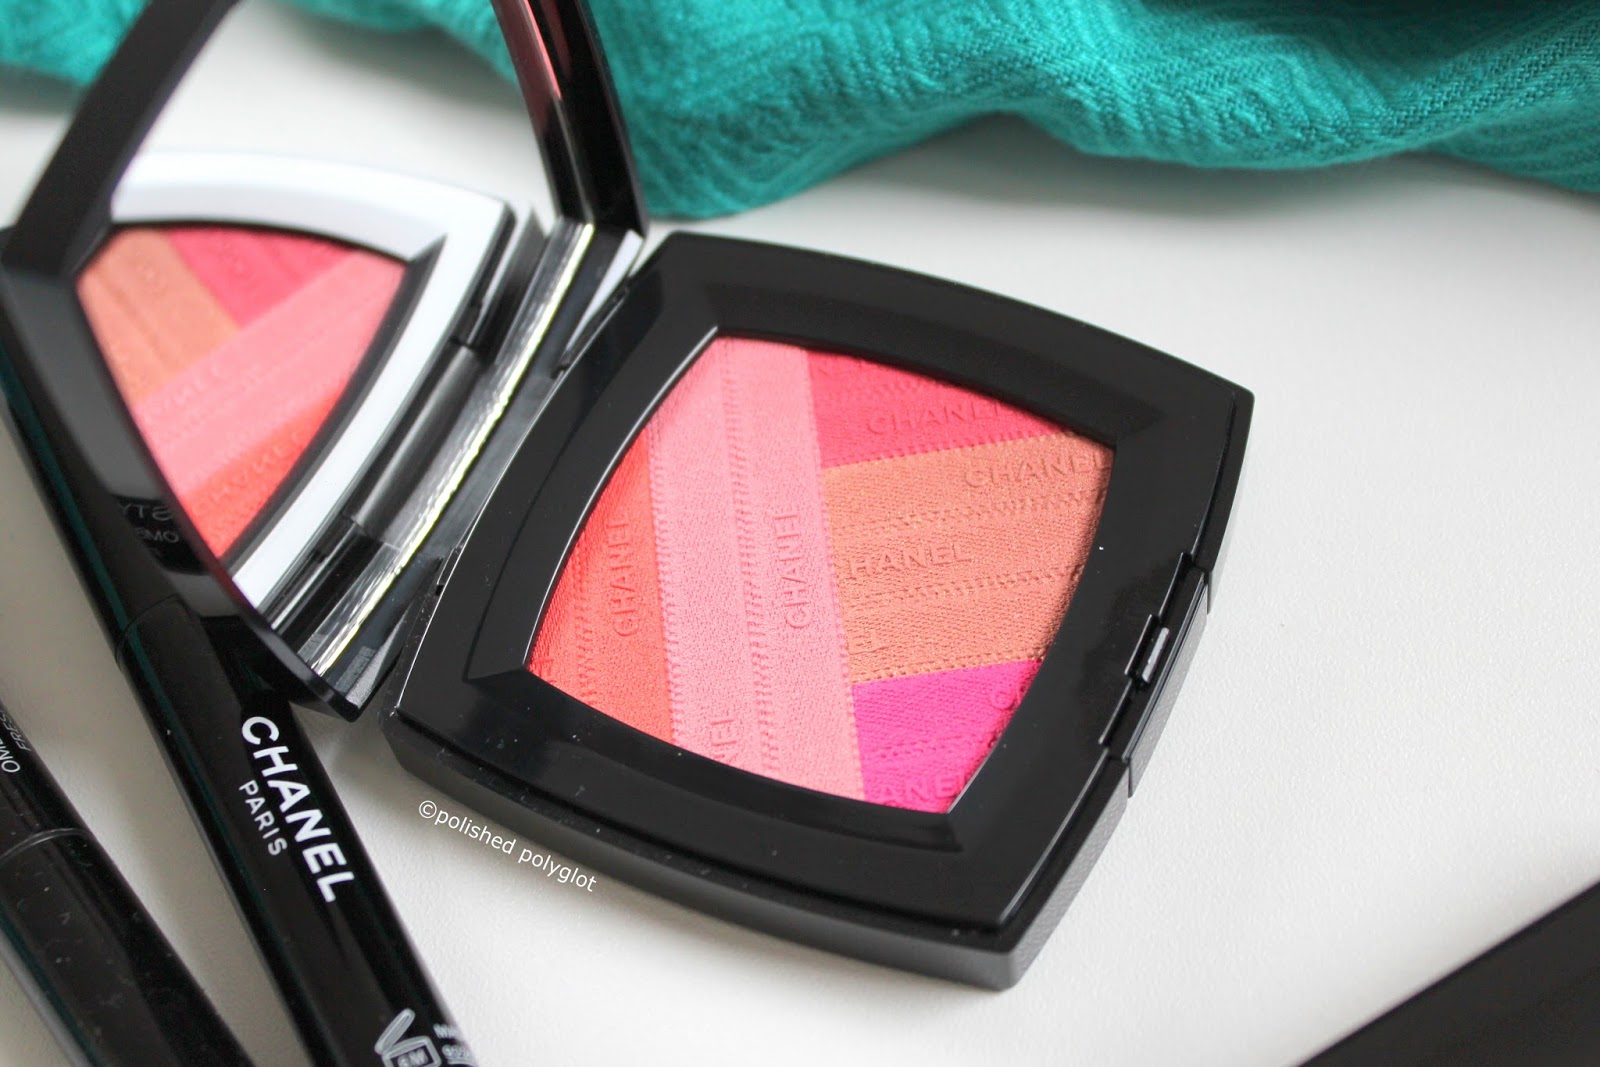 Chanel Sunkiss Ribbon blush. Too pretty to be resisted / Polished